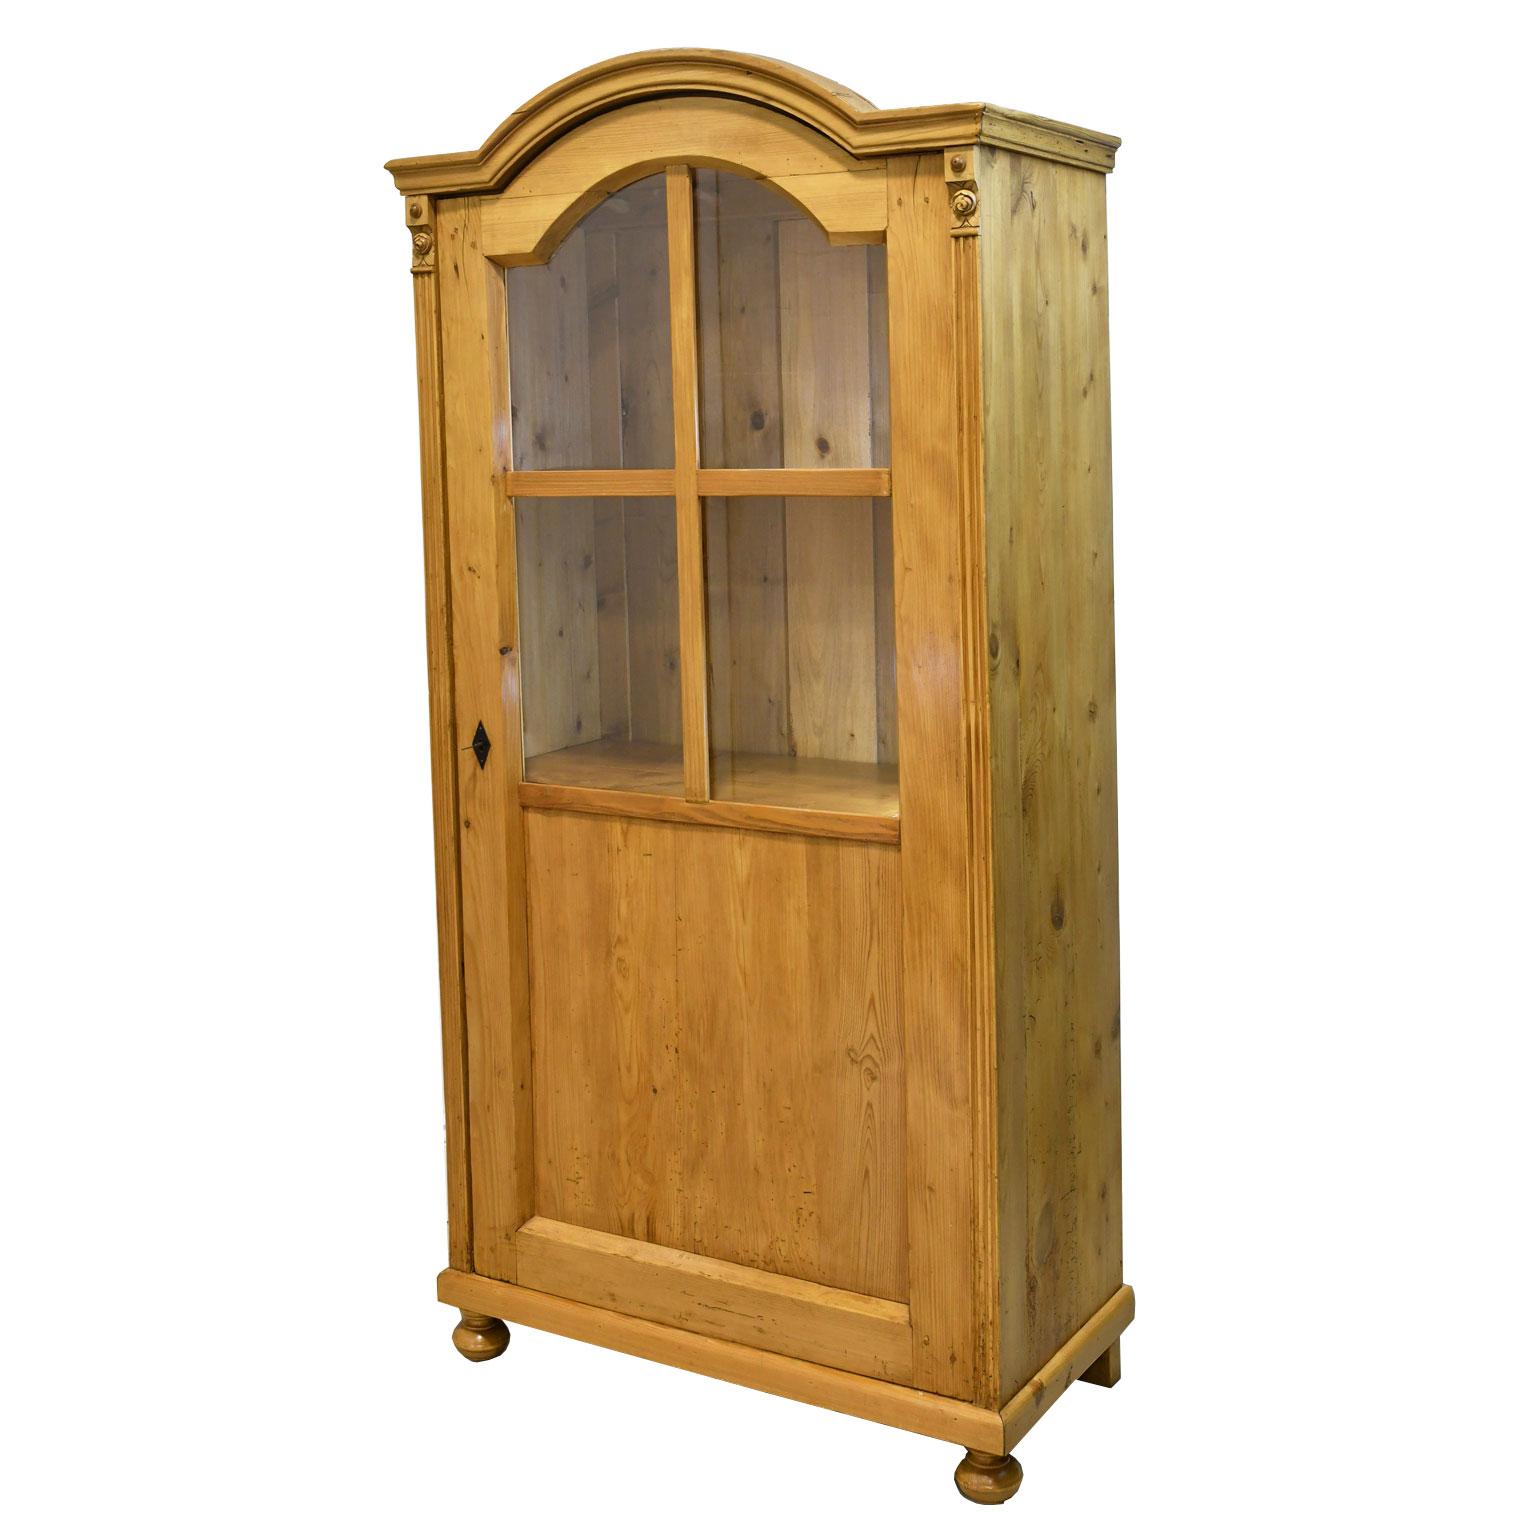 Country Austrian Cabinet in Pine with Bookcase or Vitrine & Drawers, circa 1830